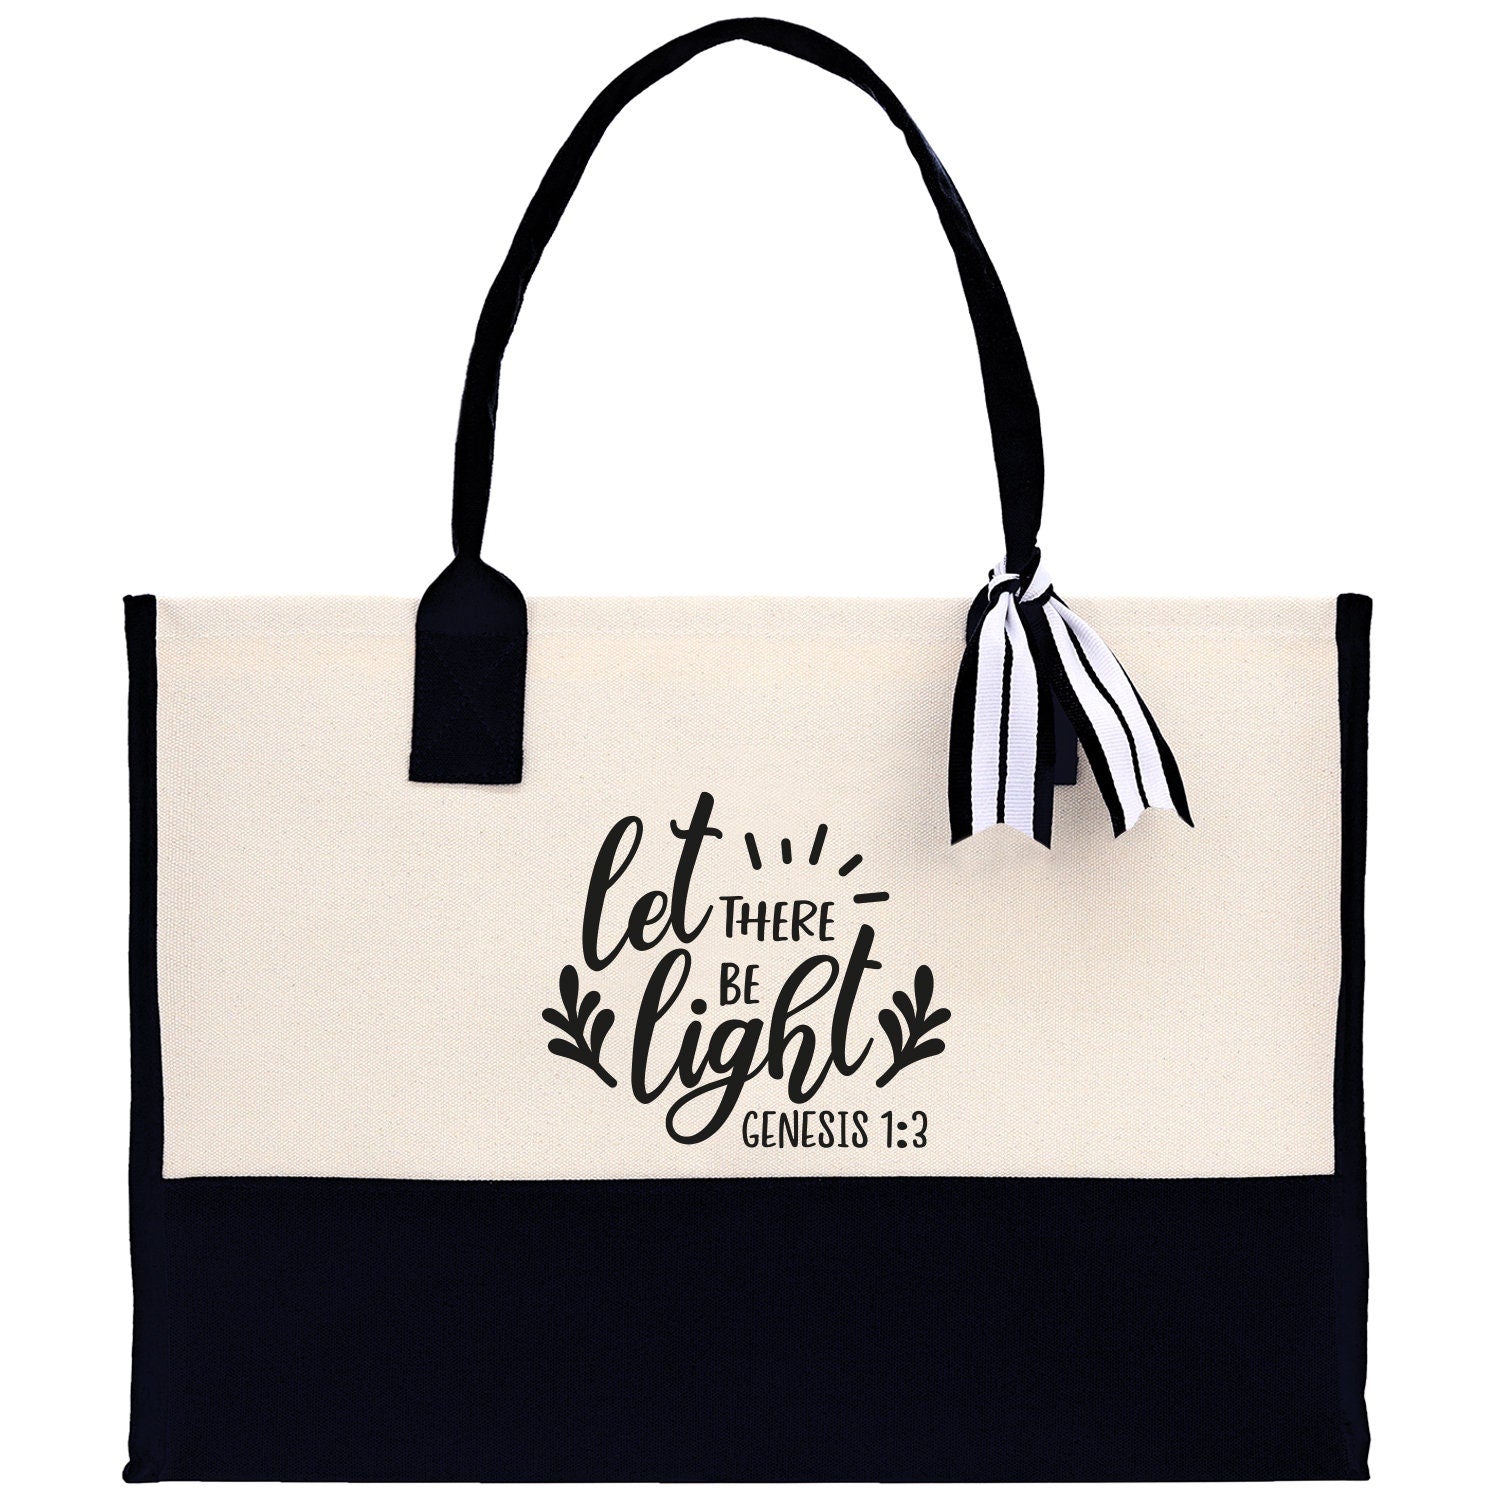 Let There Be Light Genesis 1:3 Religious Tote Bag for Women Bible Verse Canvas Tote Bag Religious Gifts Bible Verse Gift Church Tote Bag